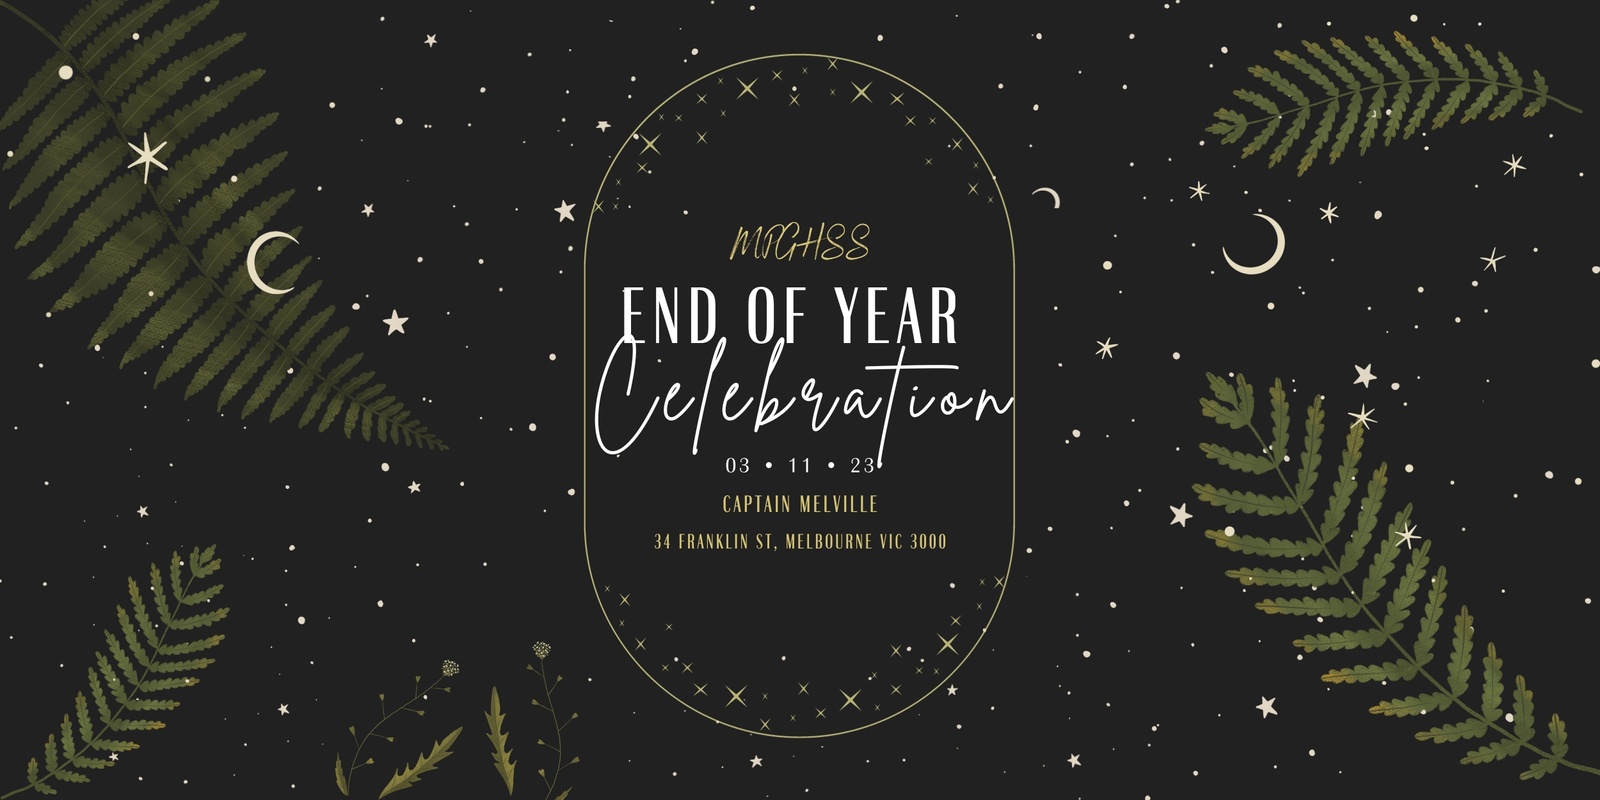 Banner image for MPGHSS End of Year Celebration